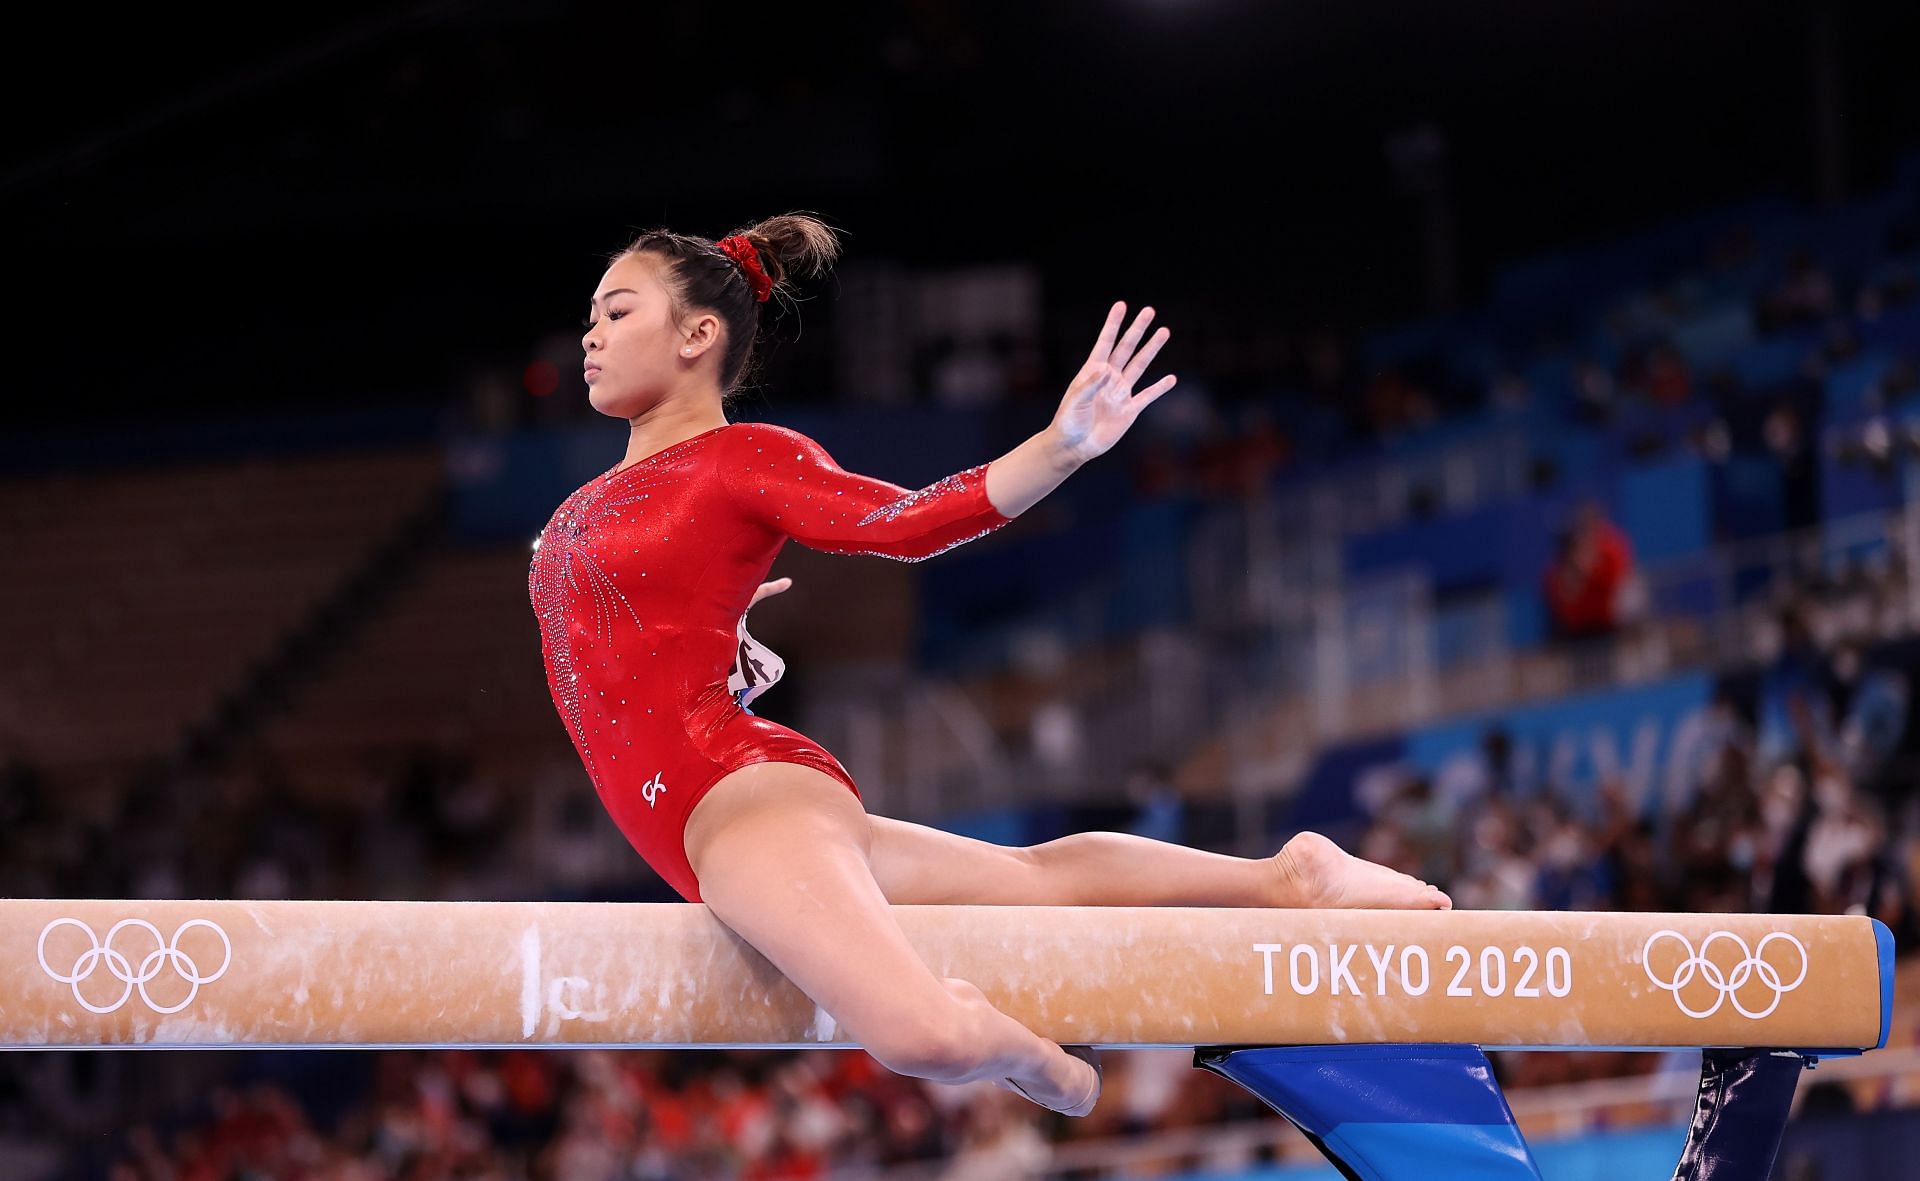 Suni Lee in action in Tokyo Olympics